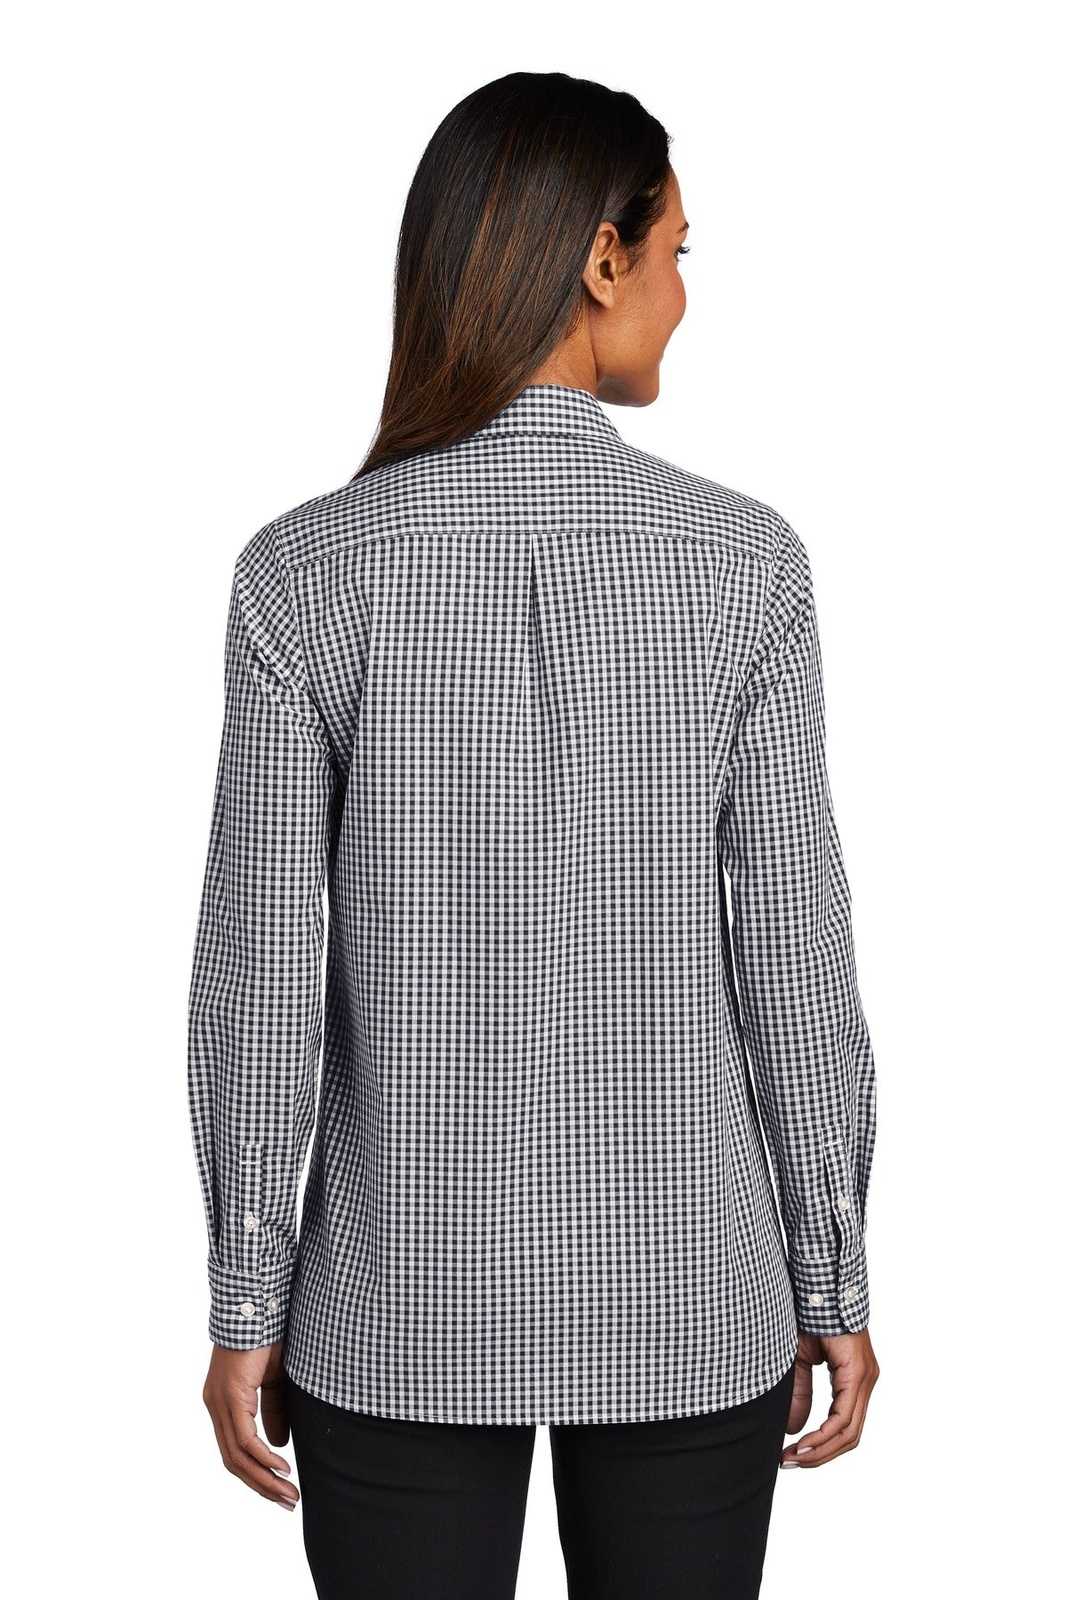 Port Authority LW644 Ladies Broadcloth Gingham Easy Care Shirt - Black White - HIT a Double - 2